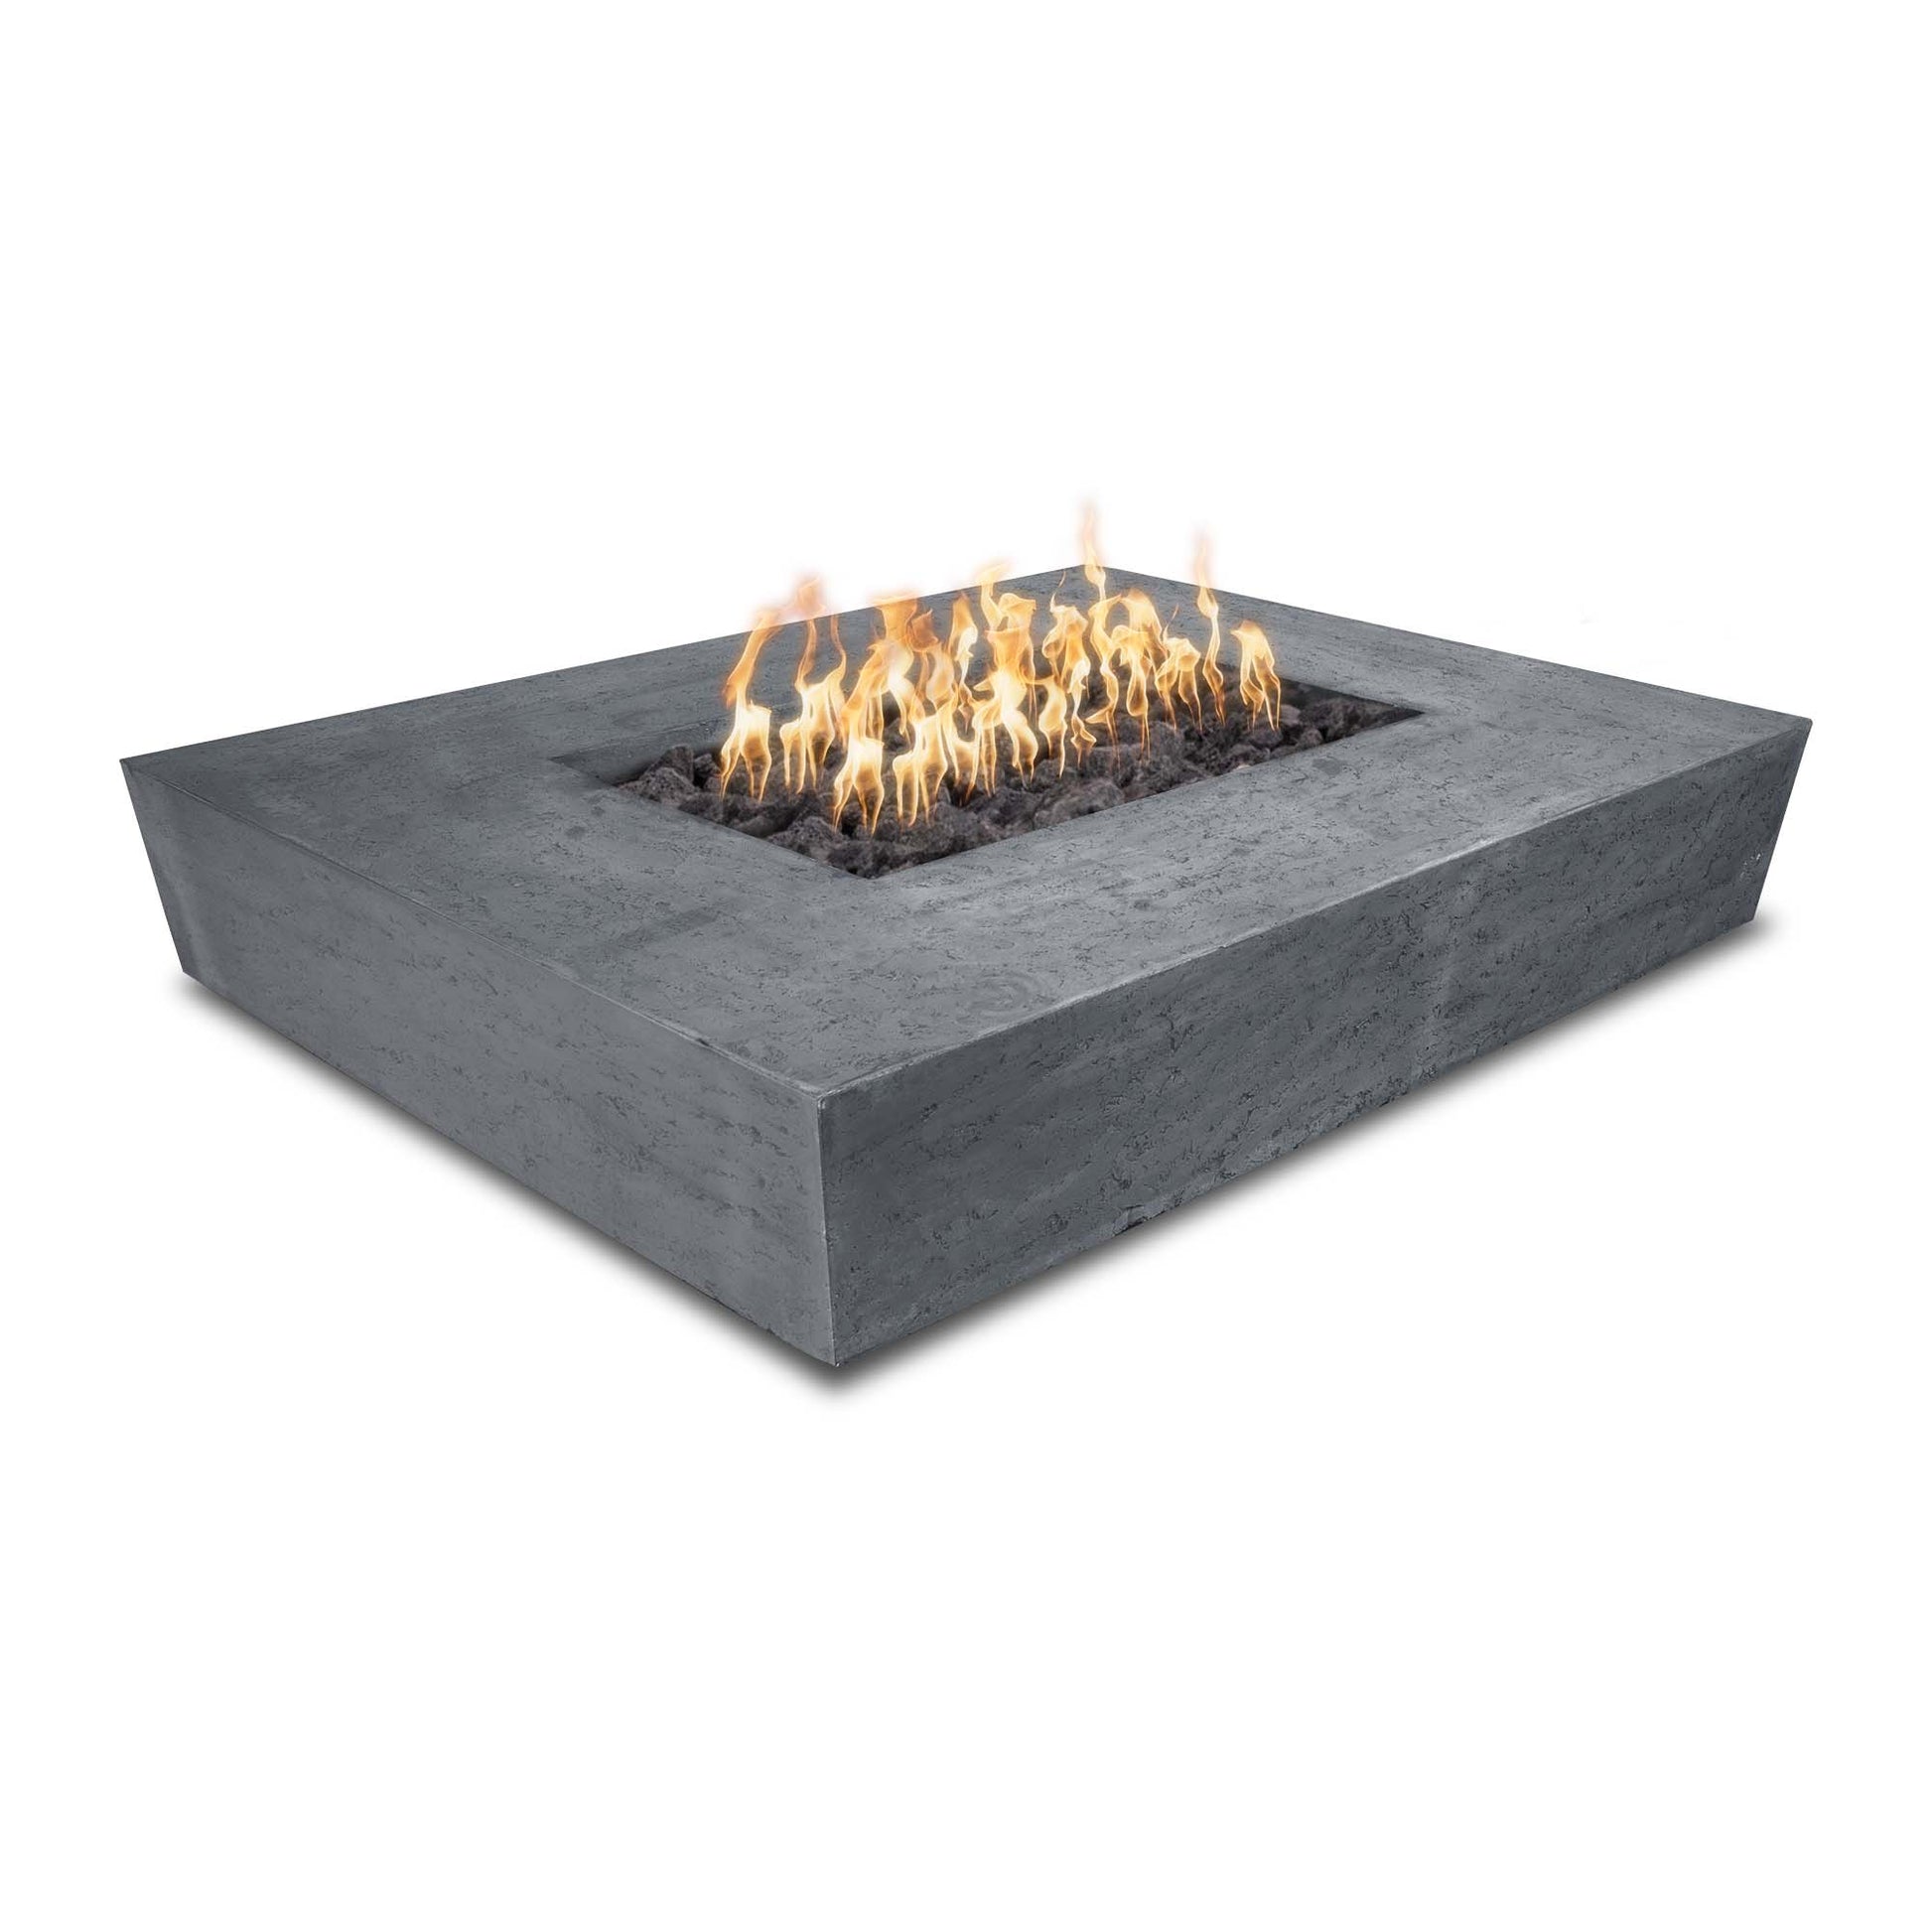 The Outdoor Plus Rectangular Heiko 58" Ash GFRC Concrete Liquid Propane Fire Pit with 12V Electronic Ignition